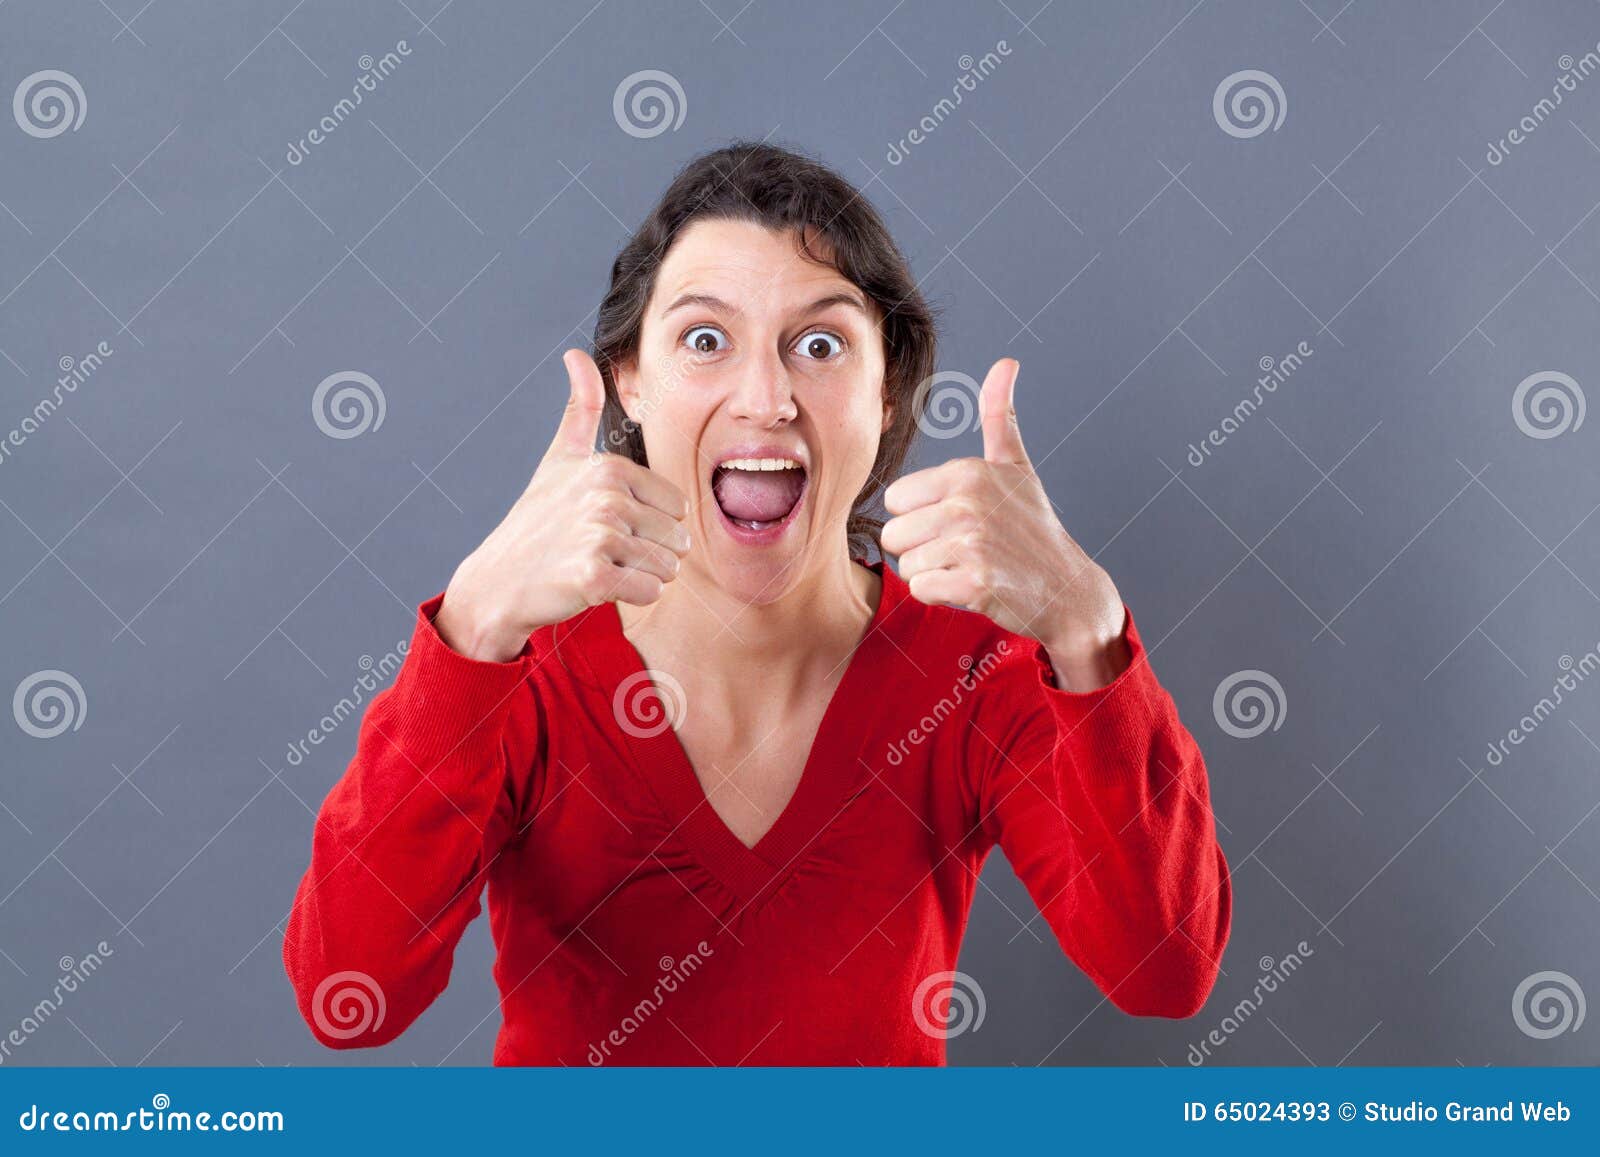 ecstatic young woman shouting with thumbs up for excitement